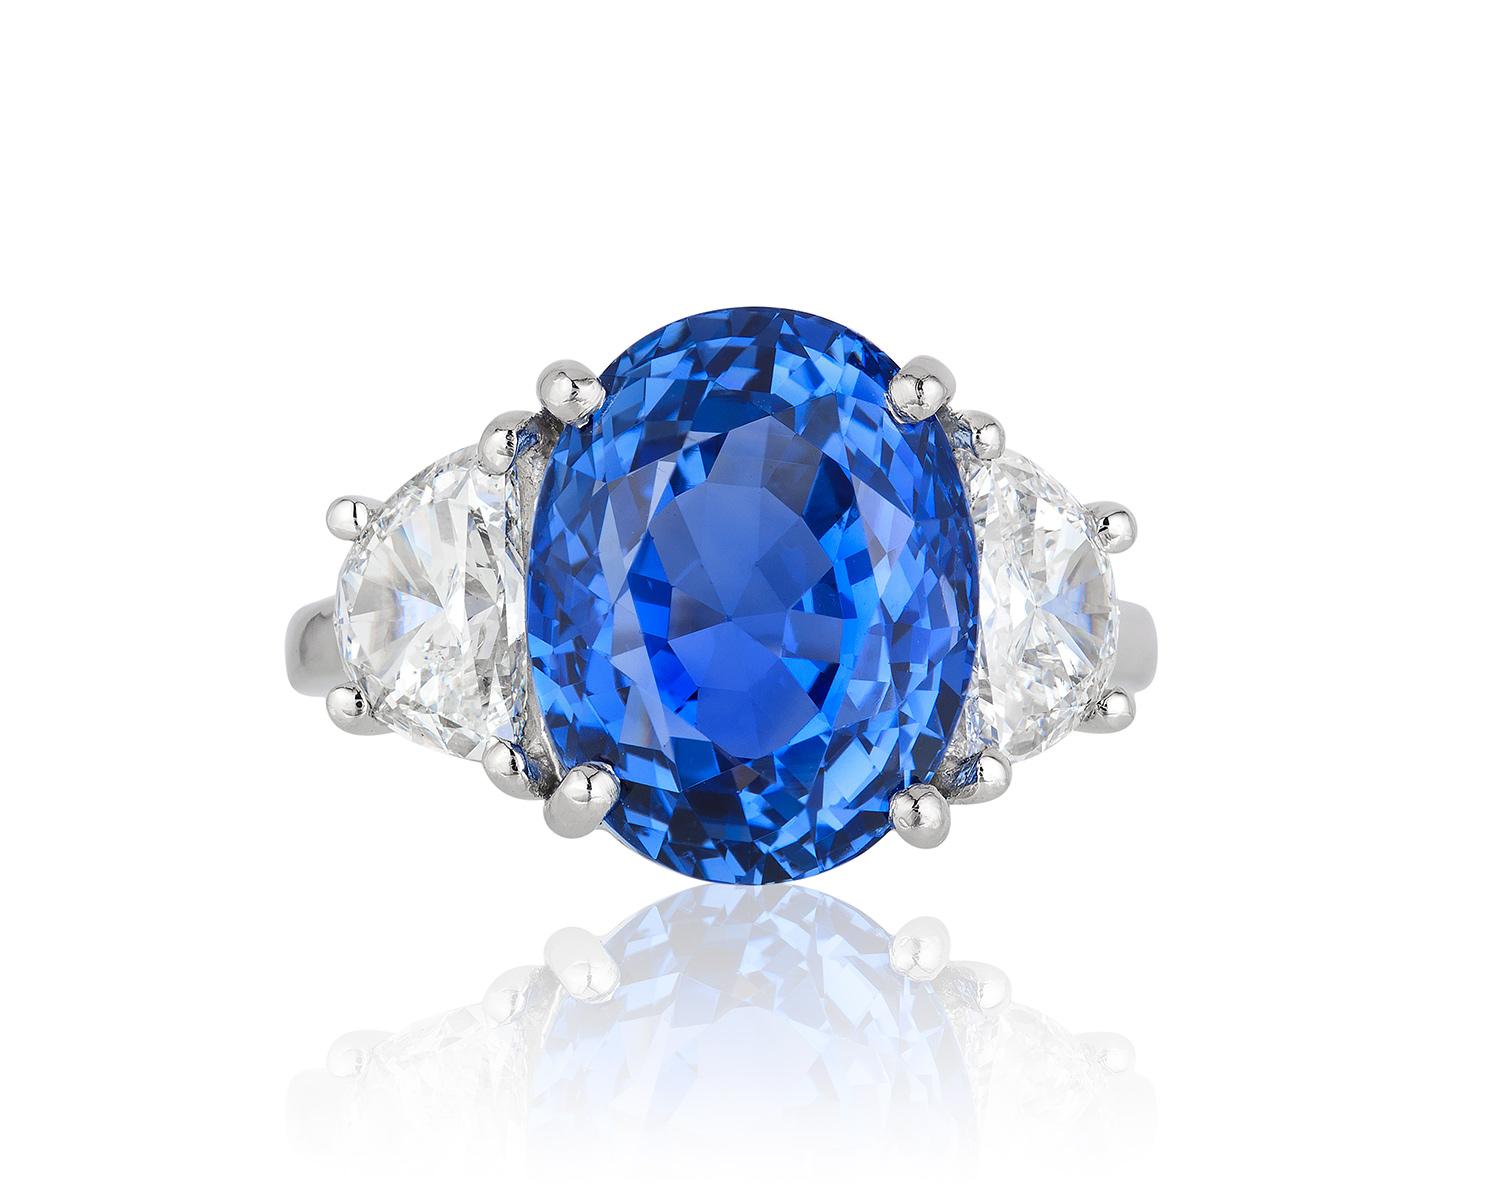 Andreoli 11.46 Carat No Heat Ceylon Sapphire Diamond Platinum Ring CDC Certified

This ring features:
- 1.56 Carat Diamond
- 11.46 Carat Sapphire
- 10.64 Gram Platinum
- Made In Italy